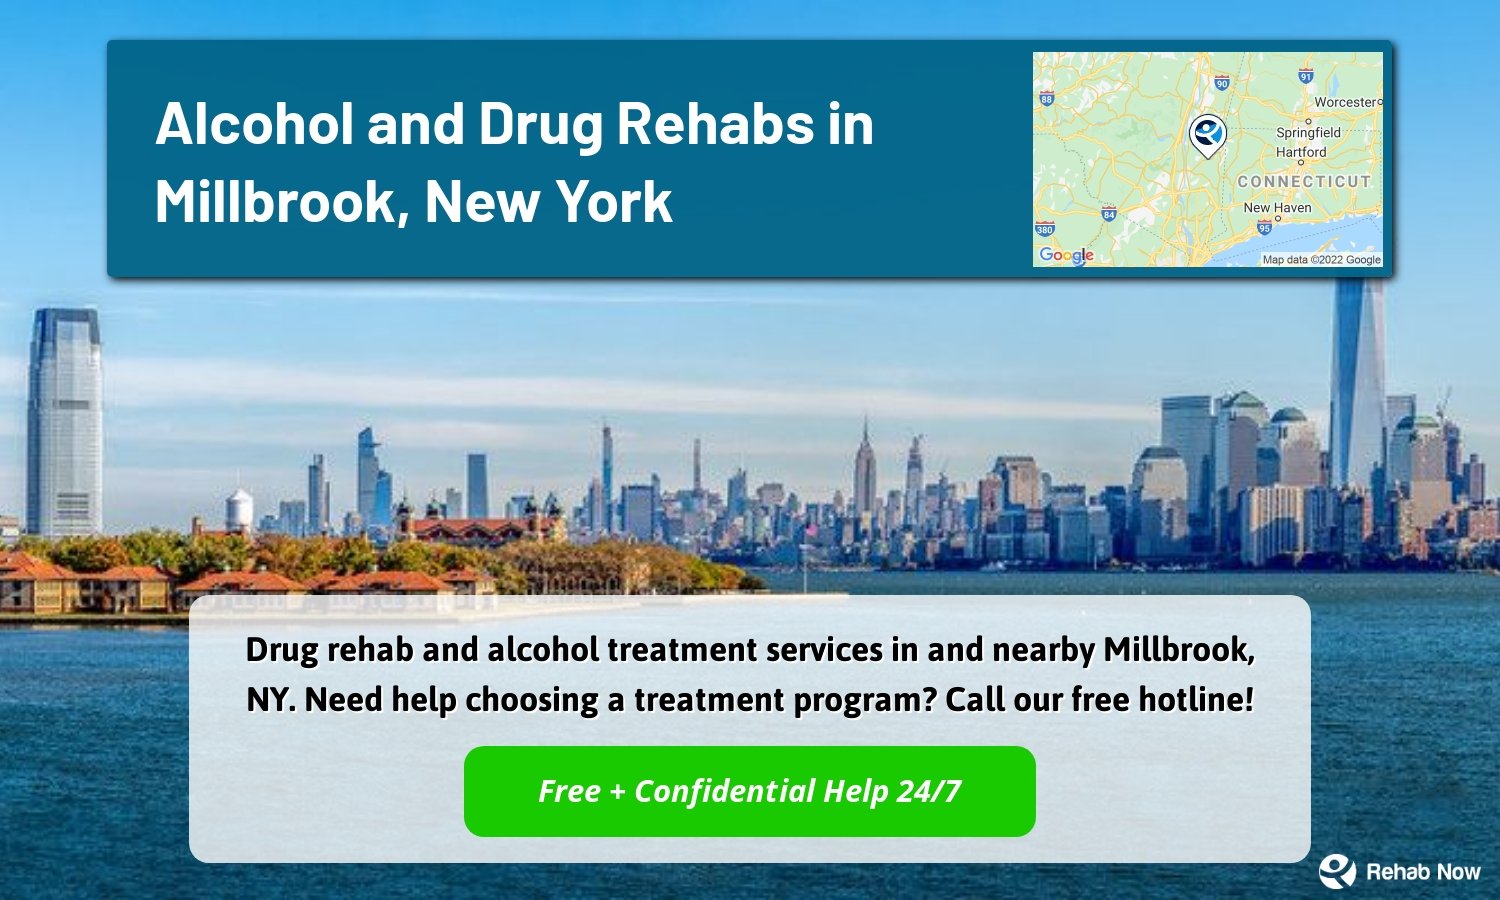 Drug rehab and alcohol treatment services in and nearby Millbrook, NY. Need help choosing a treatment program? Call our free hotline!